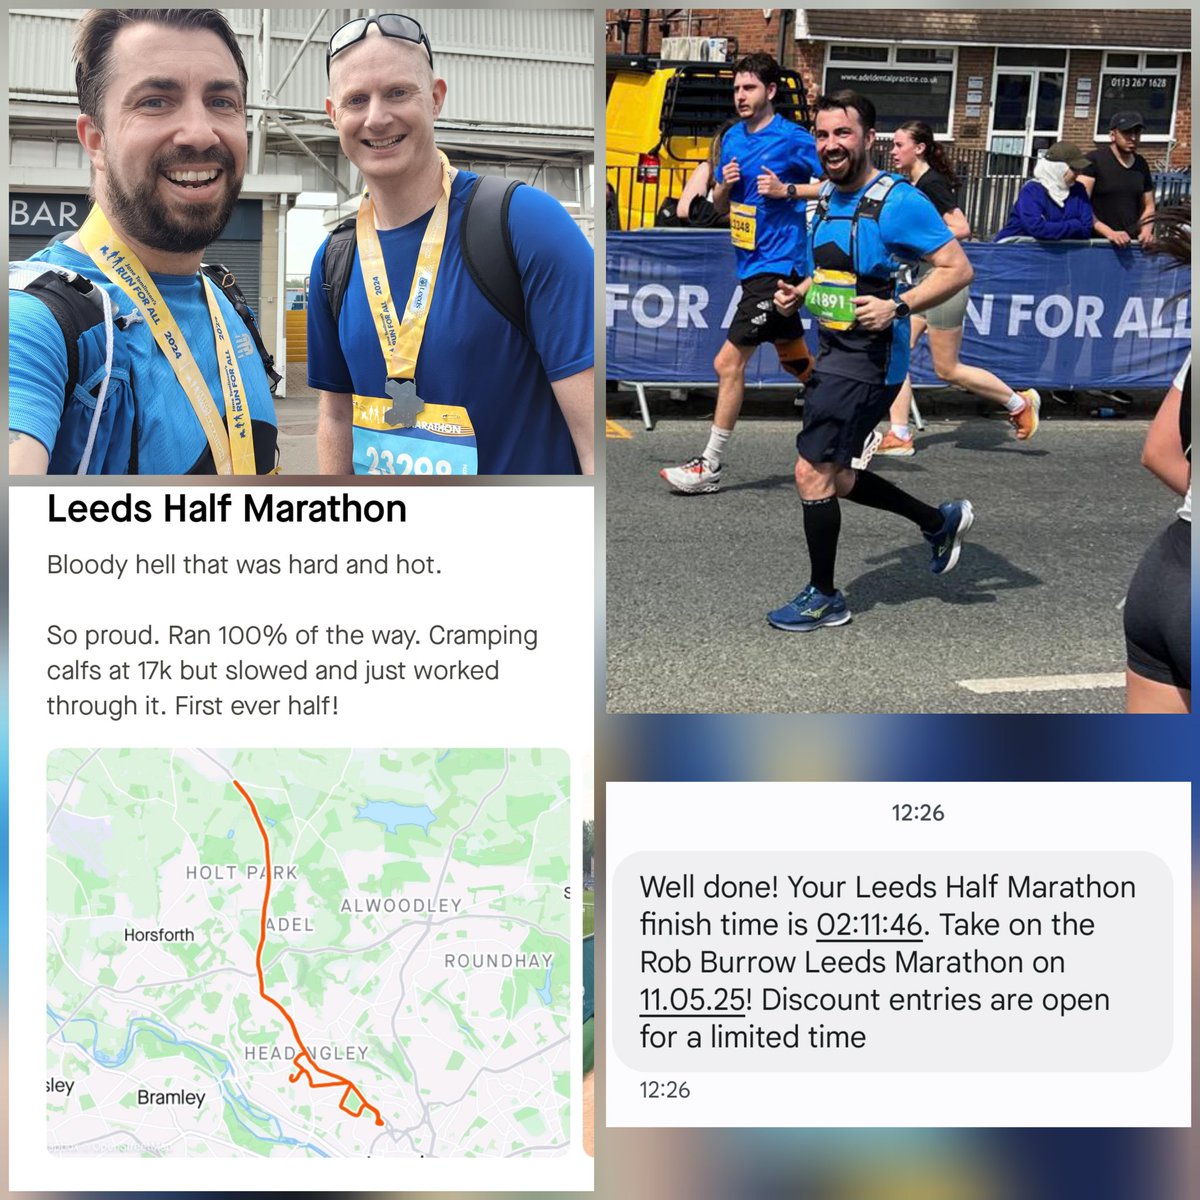 Super proud. First ever #HalfMarathon done ✔️ 2:11:46 which I am really pleased with. It was soooooo hot 🔥 #LeedsHalfMarathon I ran the whole way which I'm also pleased with... cramping calfs at 17k slowed me a bit. #running #runningman #UKrunChat woop